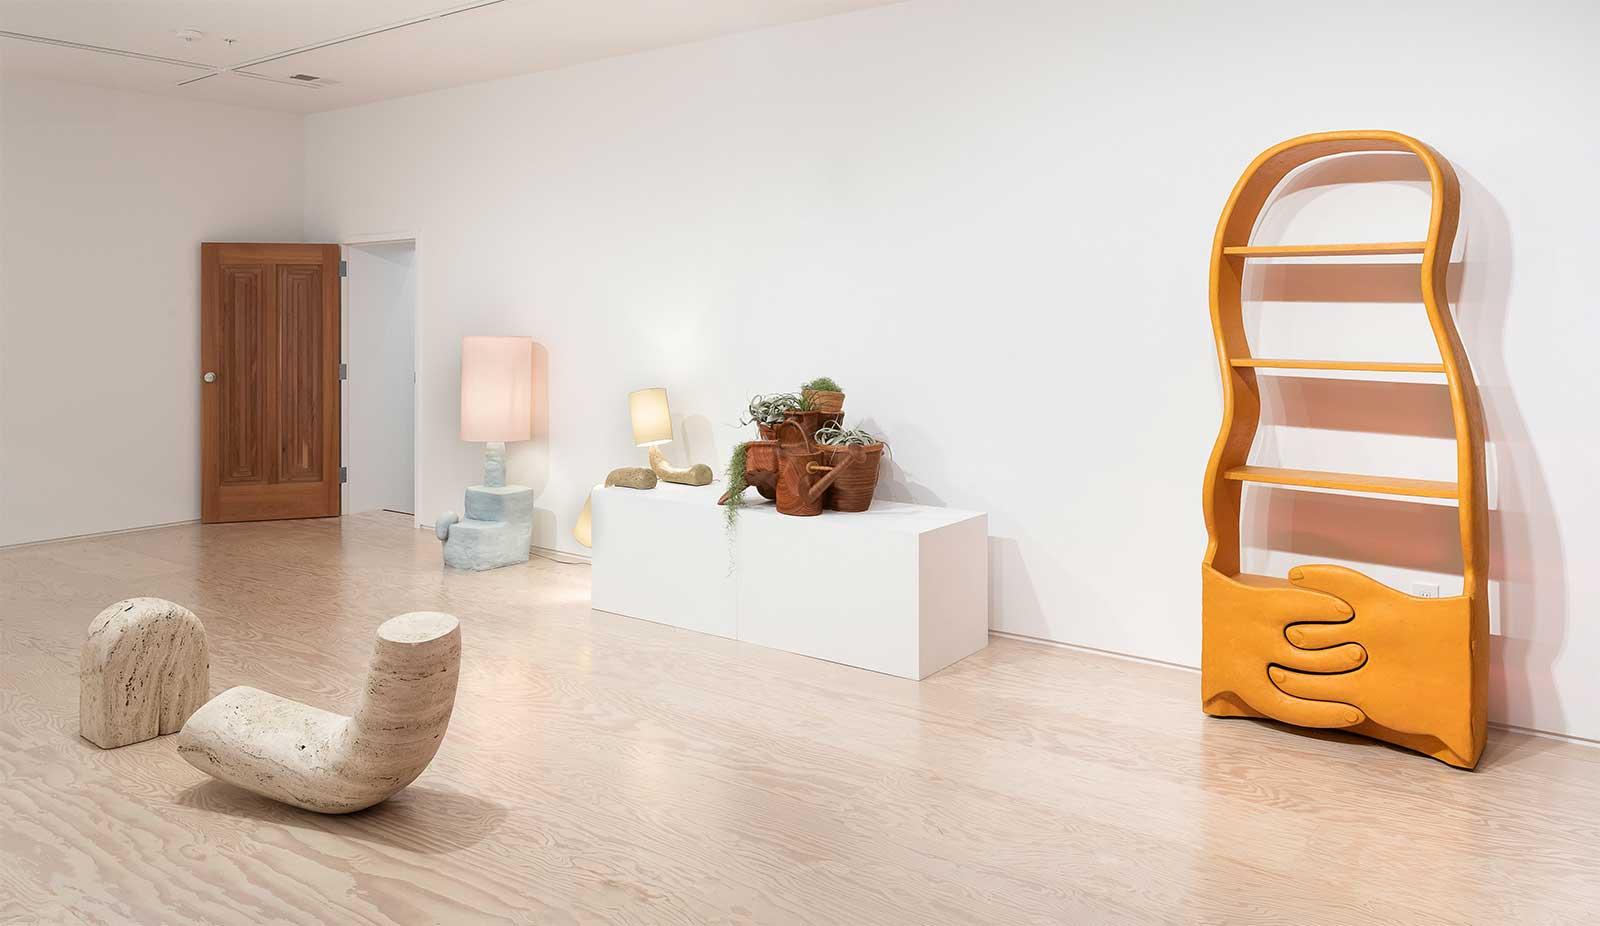 Installation view of the exhibition 'Enthroned' at Jessica Silverman.